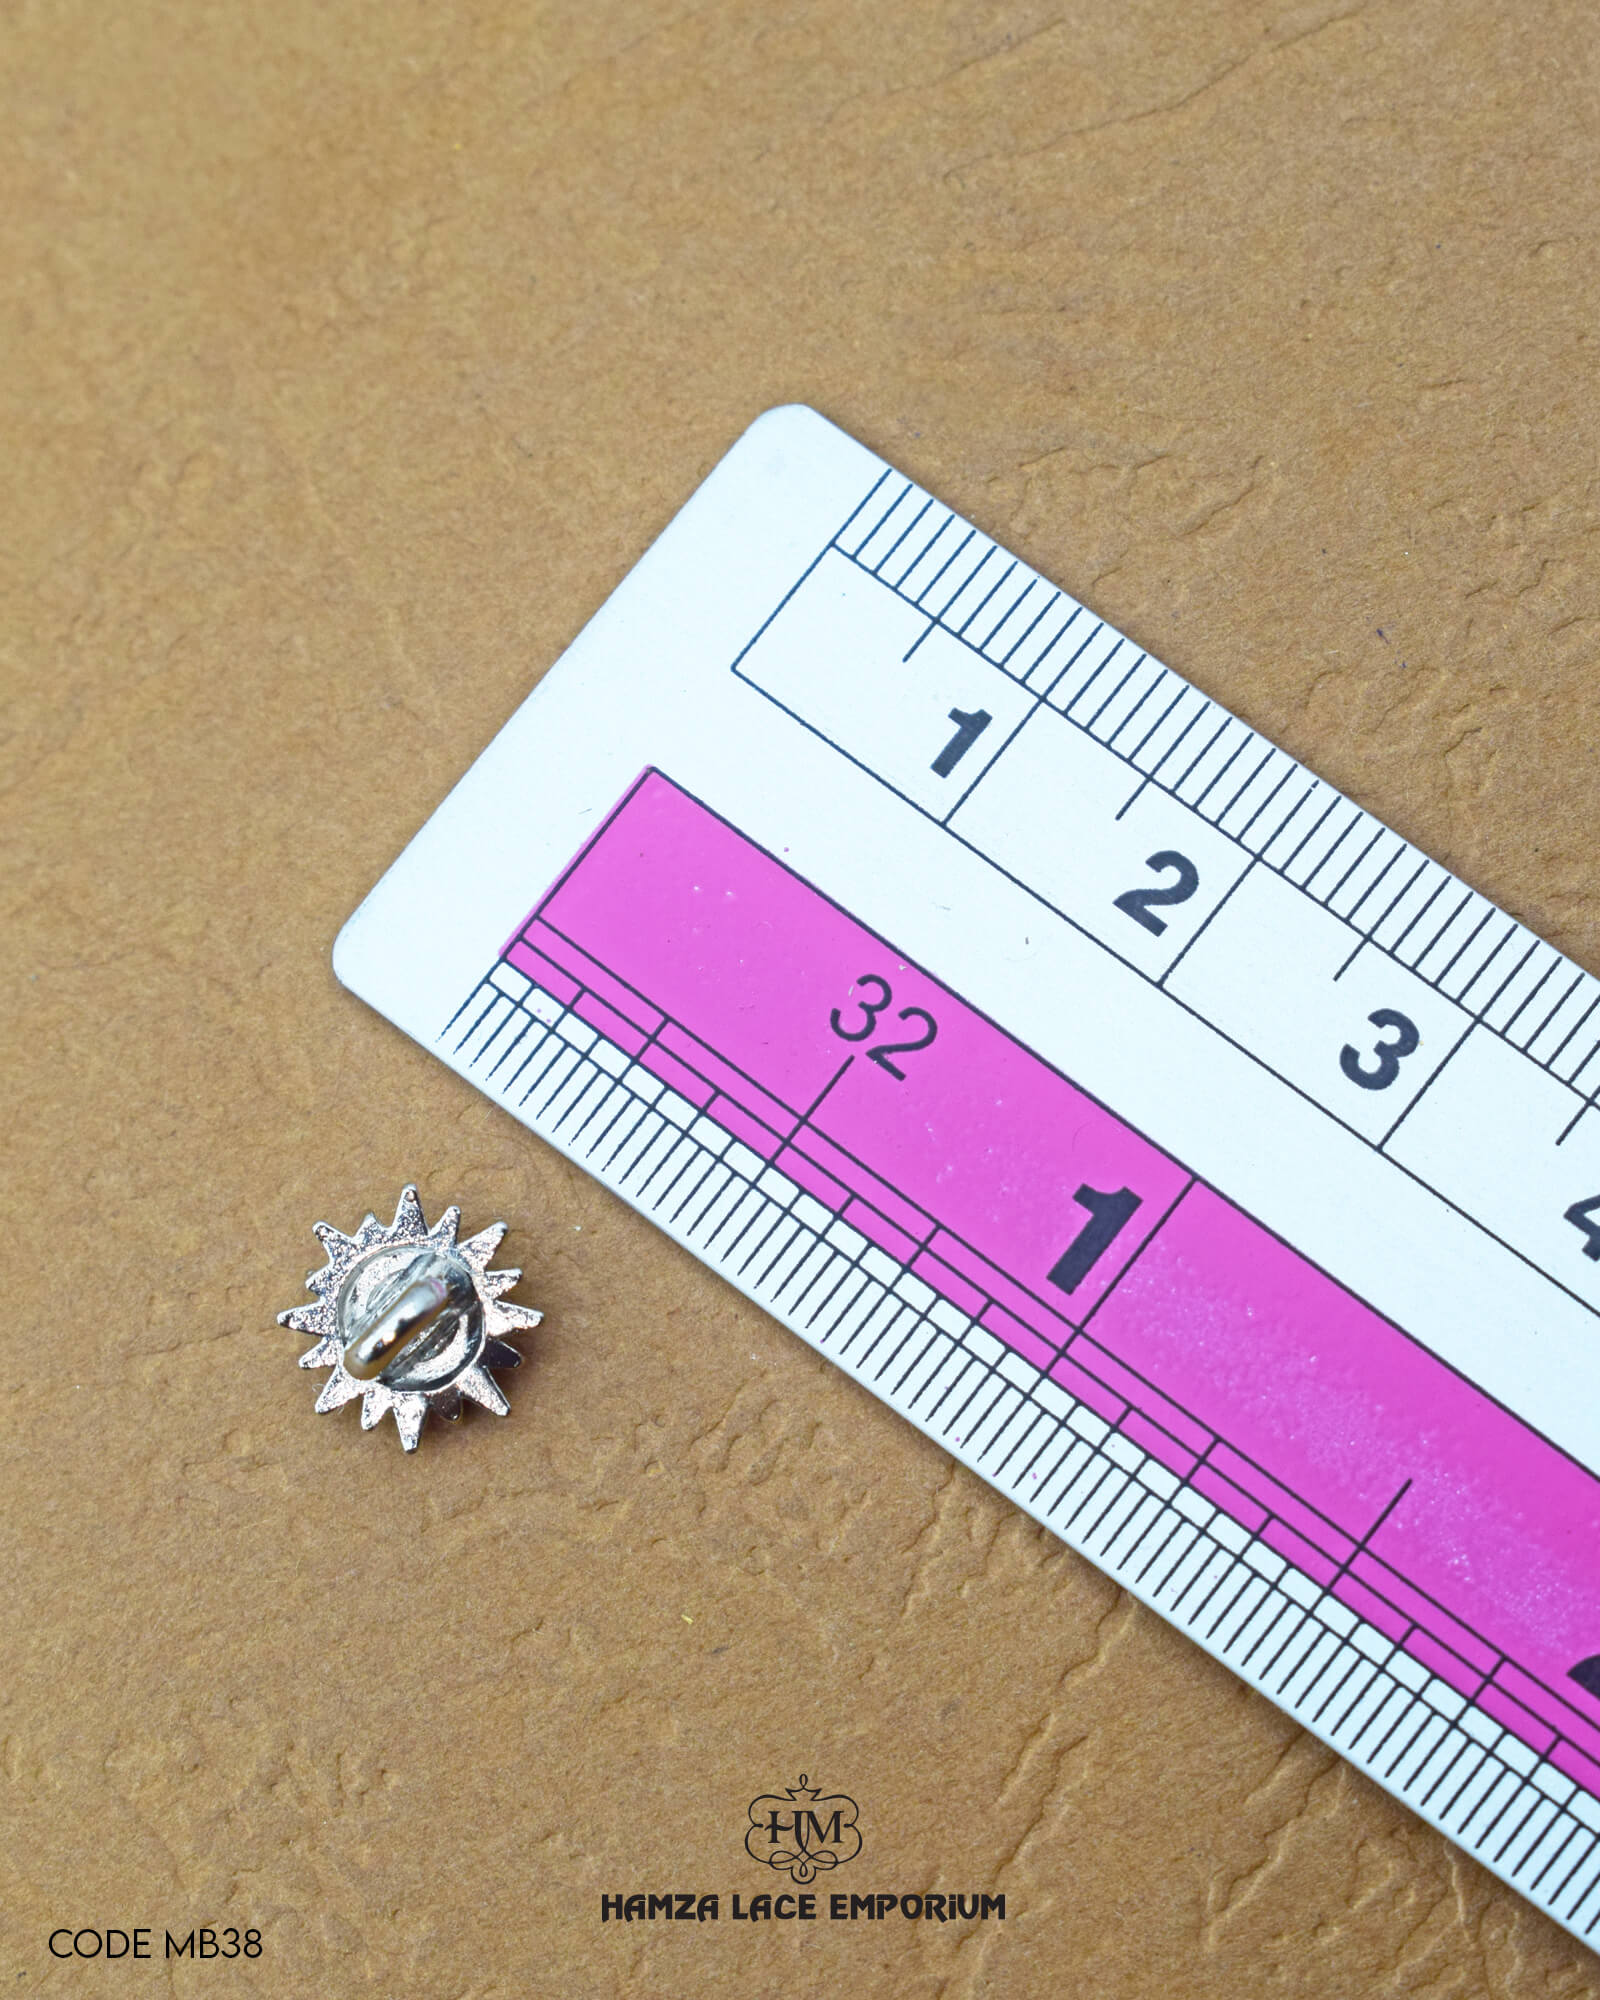 The size of the 'Flower Design Metal Button MB38' is measured using a ruler.